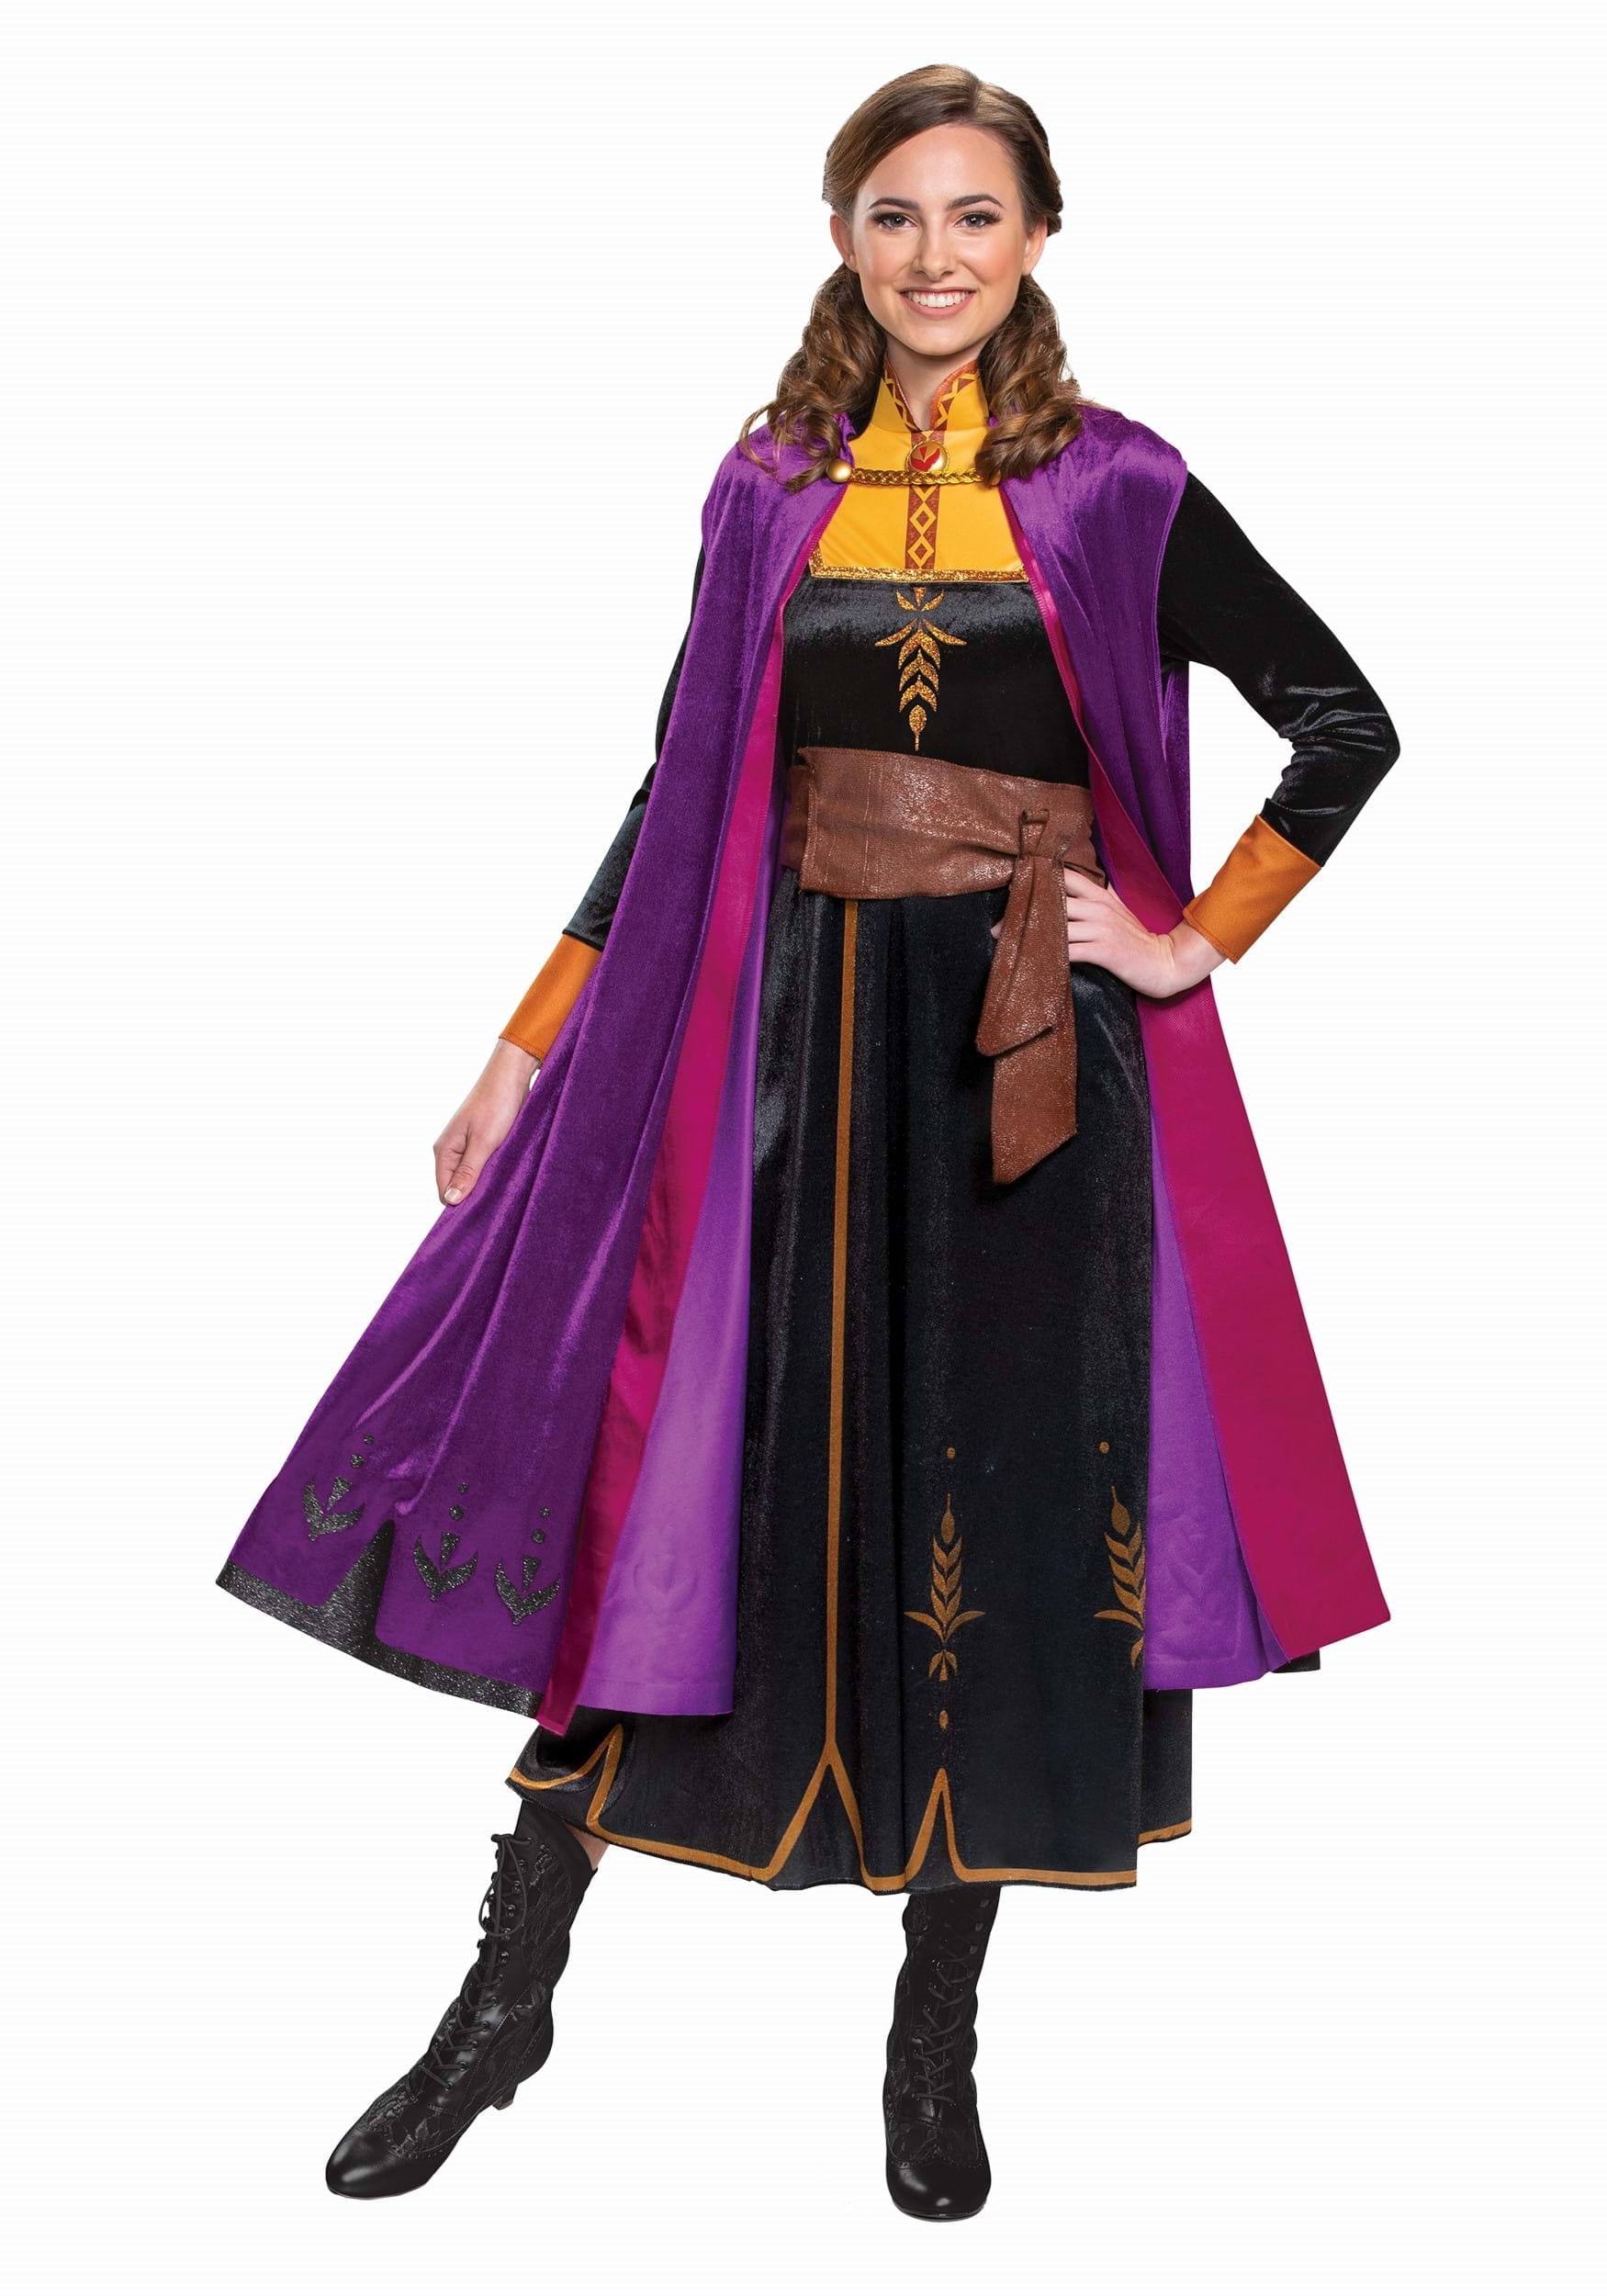 Image of Deluxe Frozen 2 Anna Womens Costume | Disney Costume for Adults ID DI23210-XXL